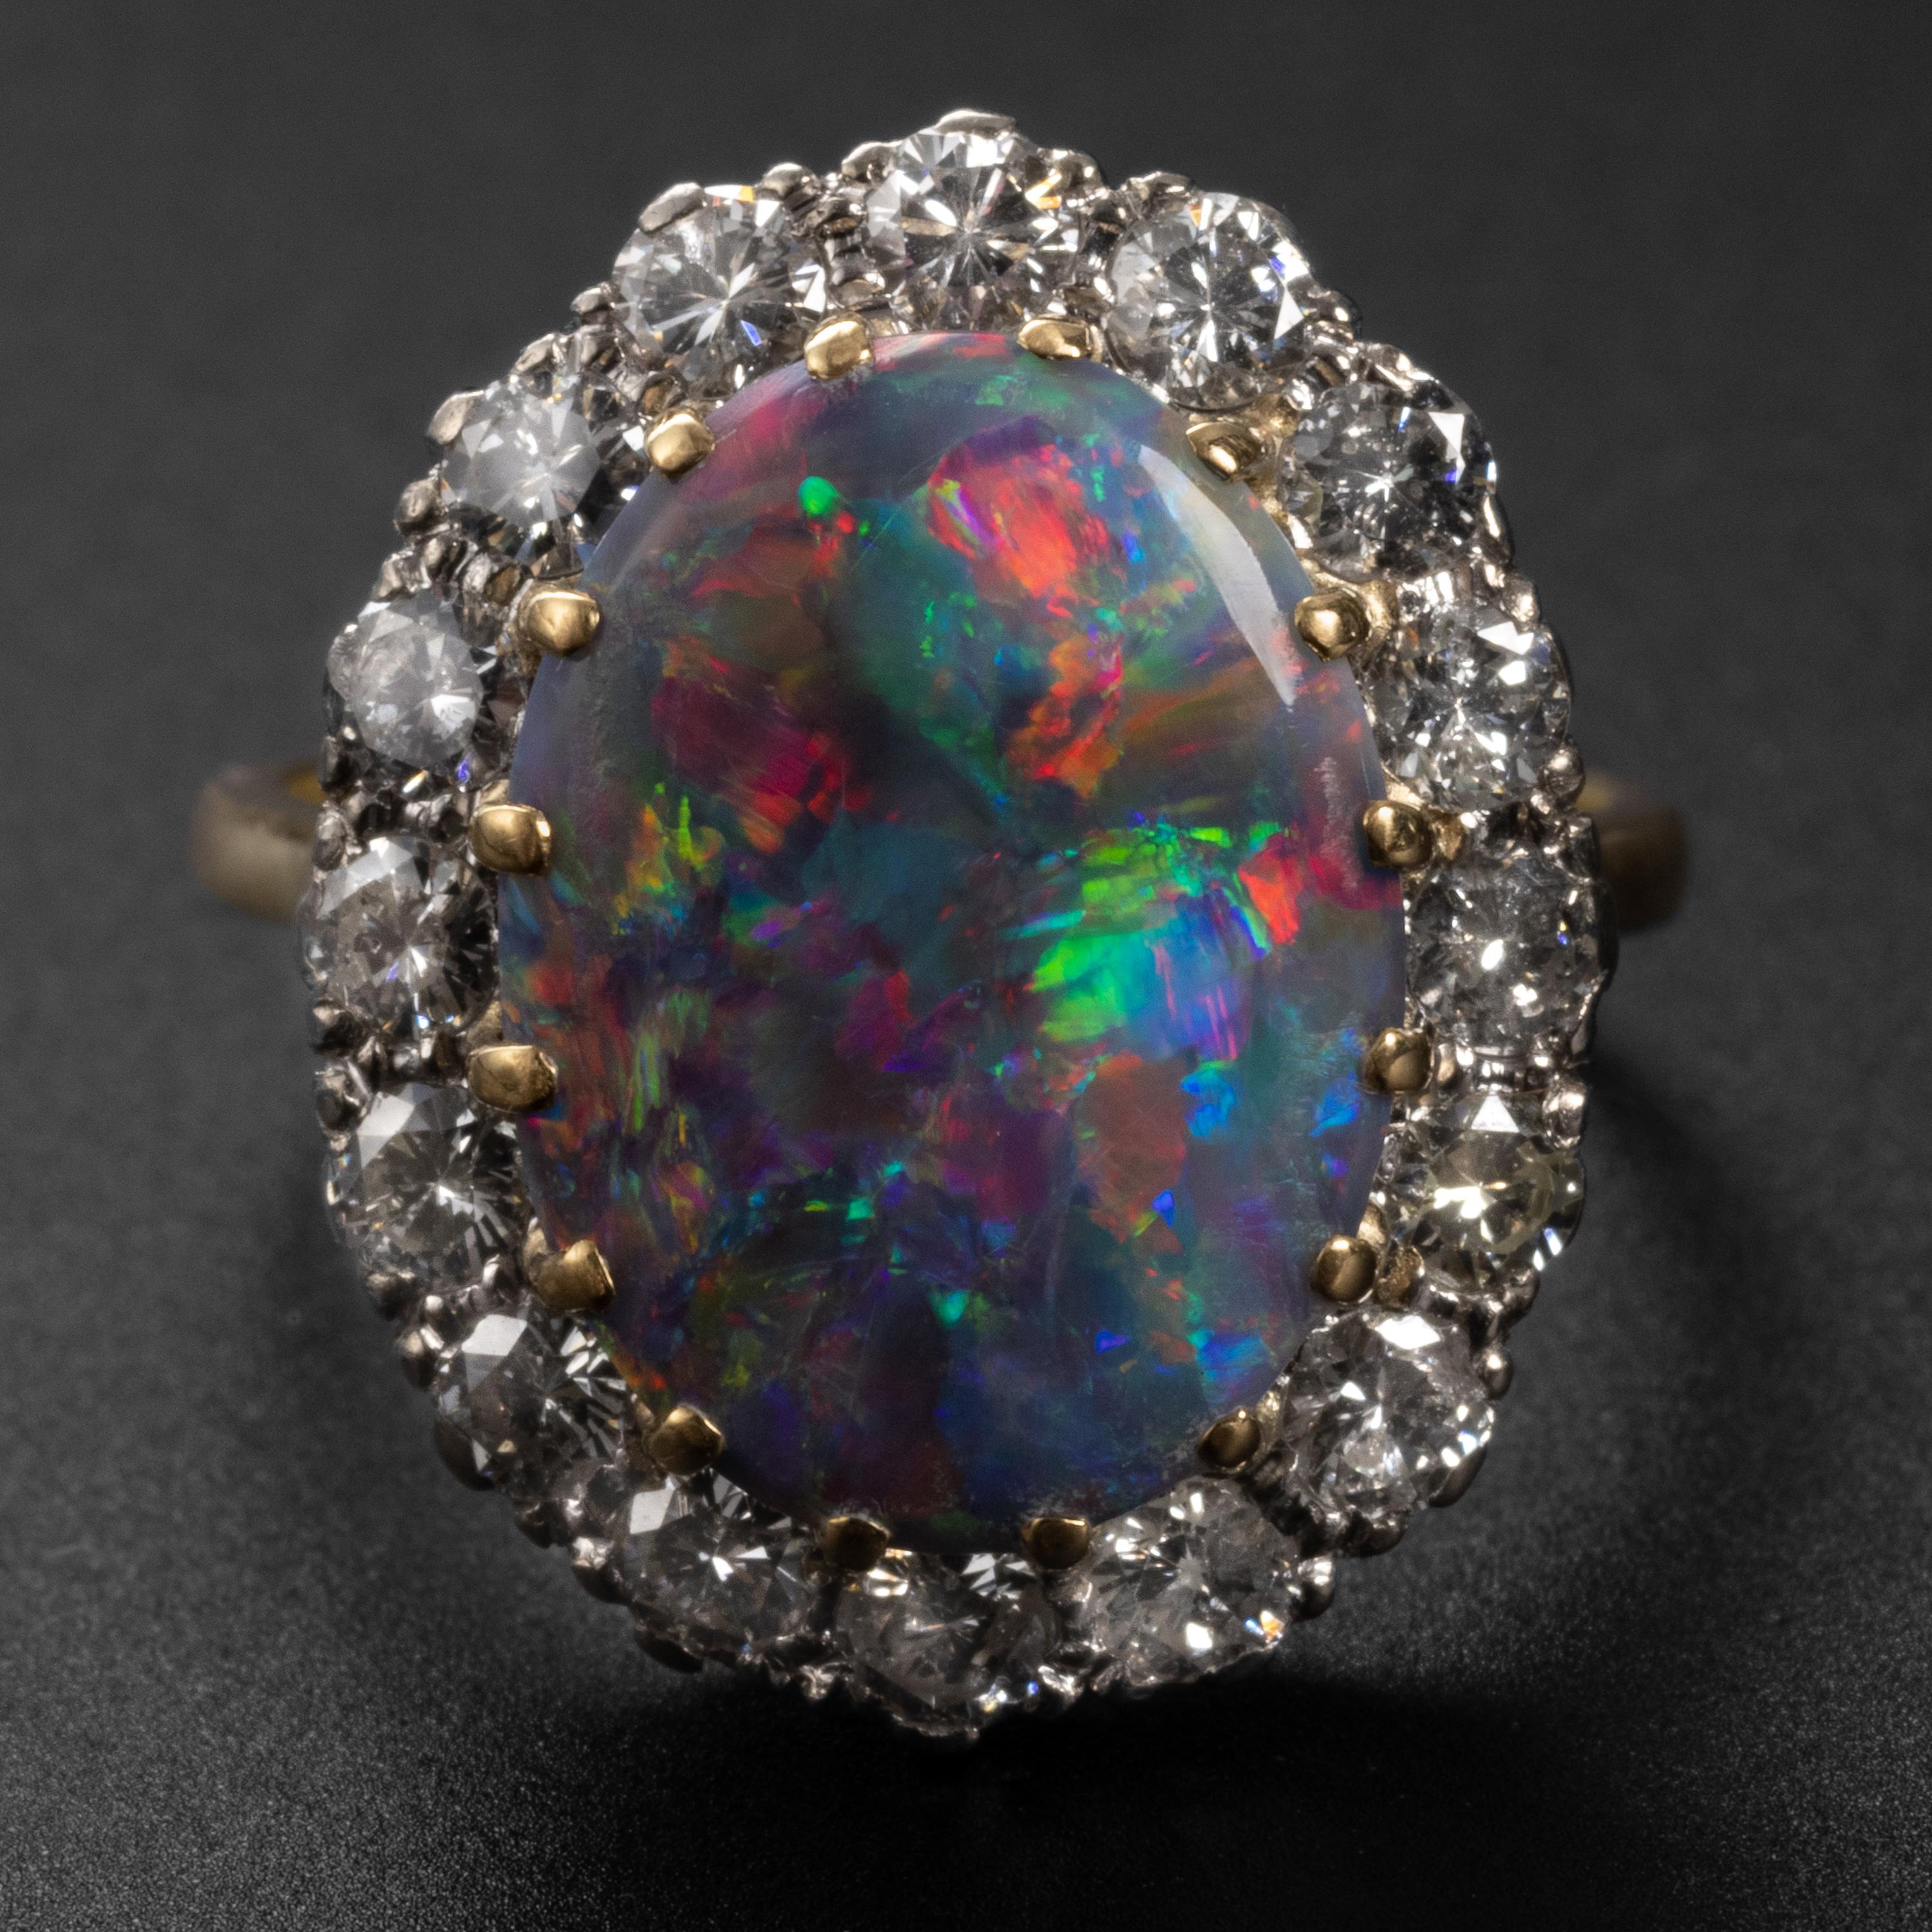 A spectacular certified untreated Australian black opal is the dazzling centerpiece of this English Mid-century ring. The magnificent solid black opal bursts with a kaleidoscope of color: vivid red, orange, yellow, pink, blue & green, displaying the